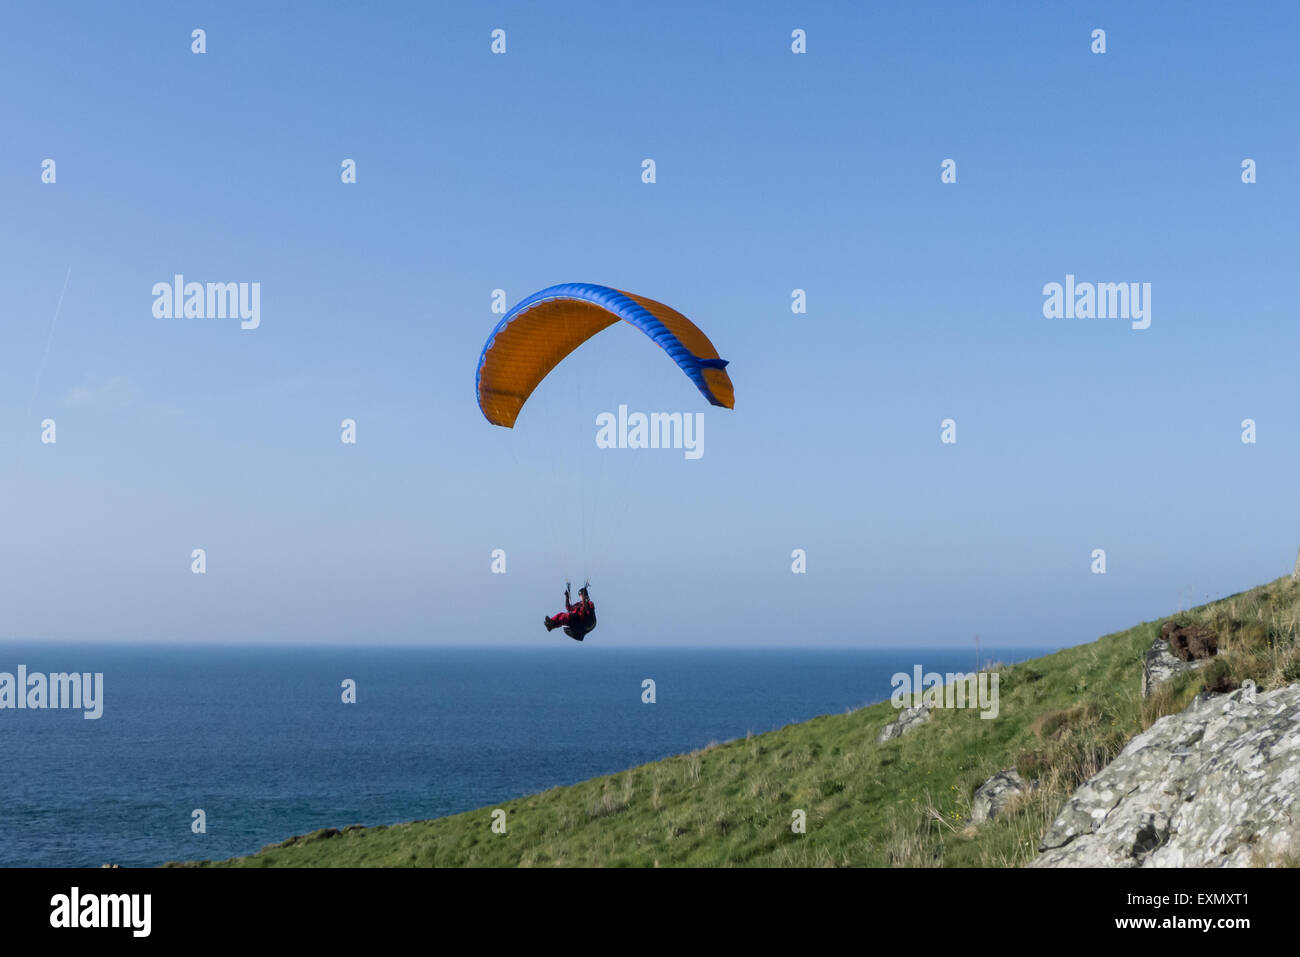 St Ives, Cornwall, England. Paraglider by the sea. Stock Photo